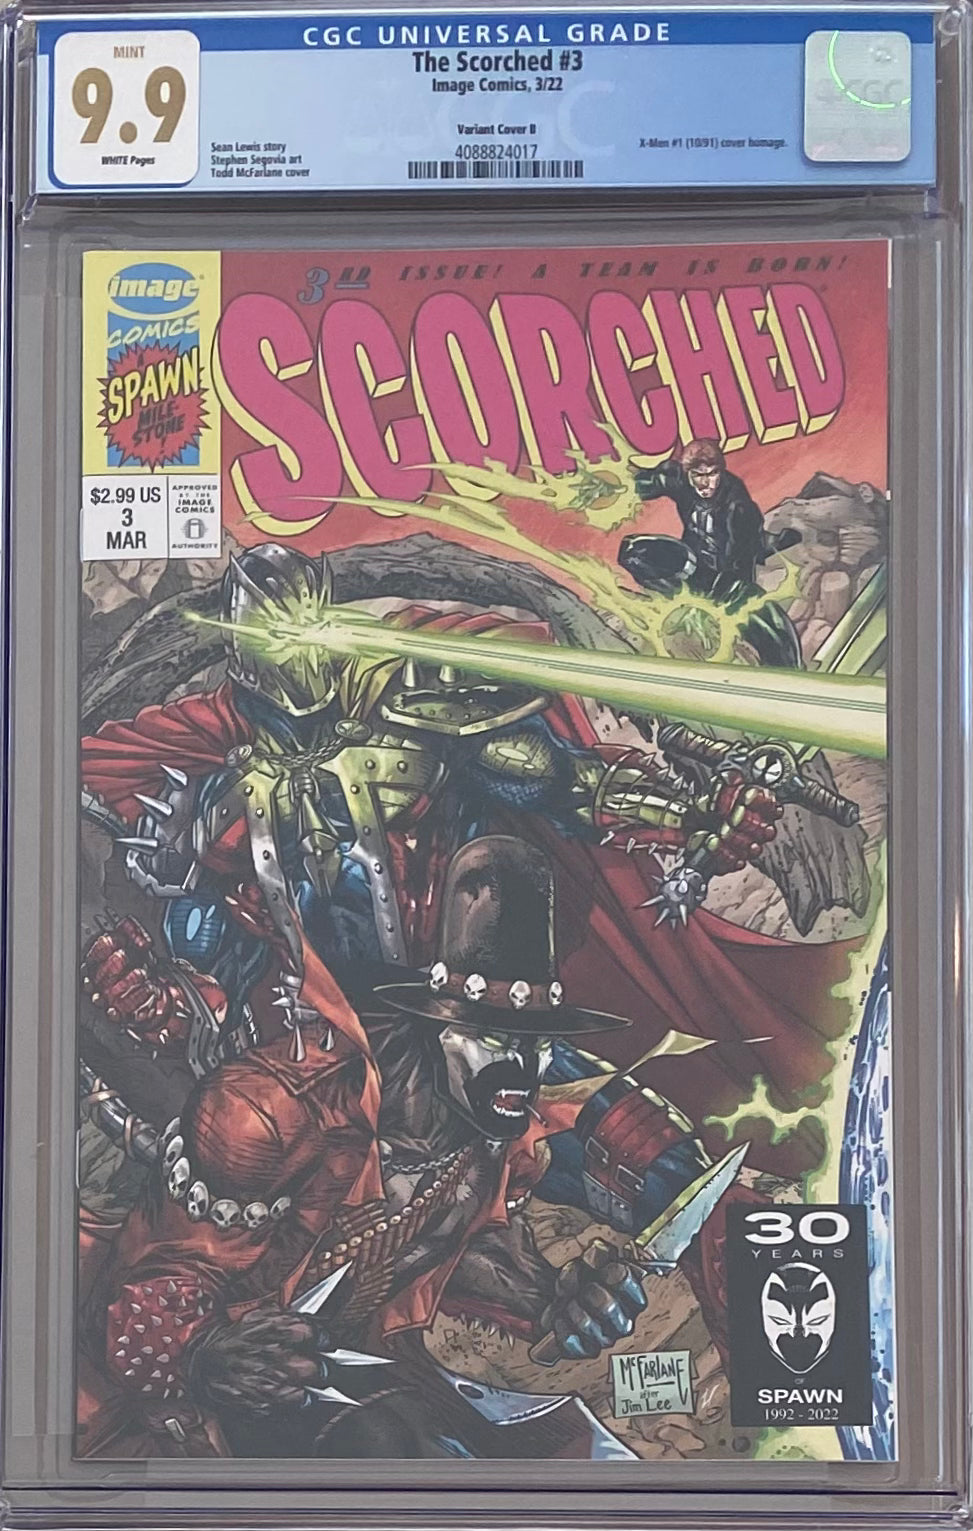 The Scorched #3 McFarlane Homage Connecting Variant CGC 9.9 MINT